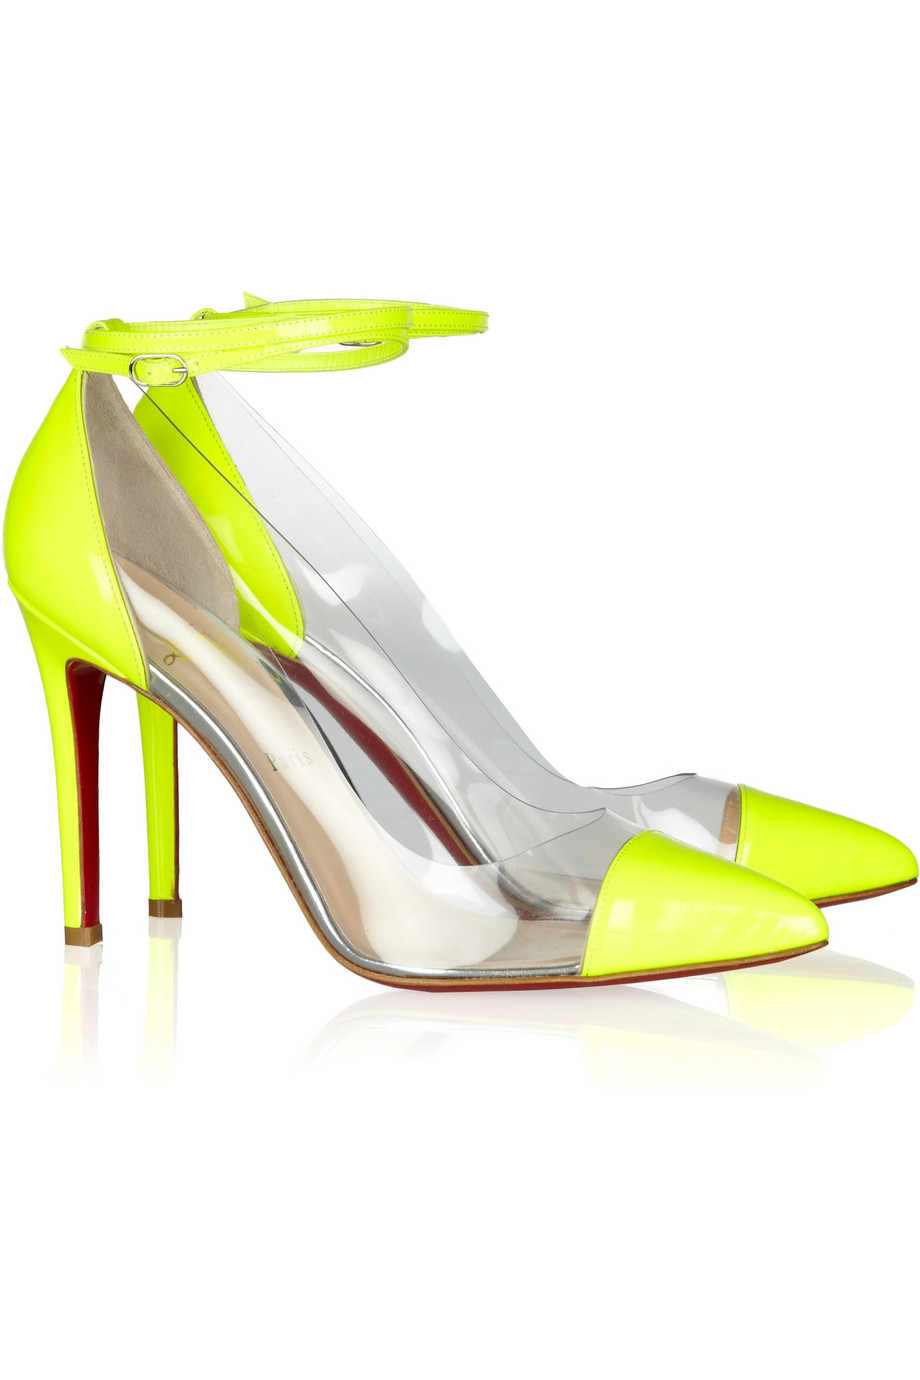 Christian Louboutin Un Bout 100 Patent Leather and Pvc Pumps | Lyst